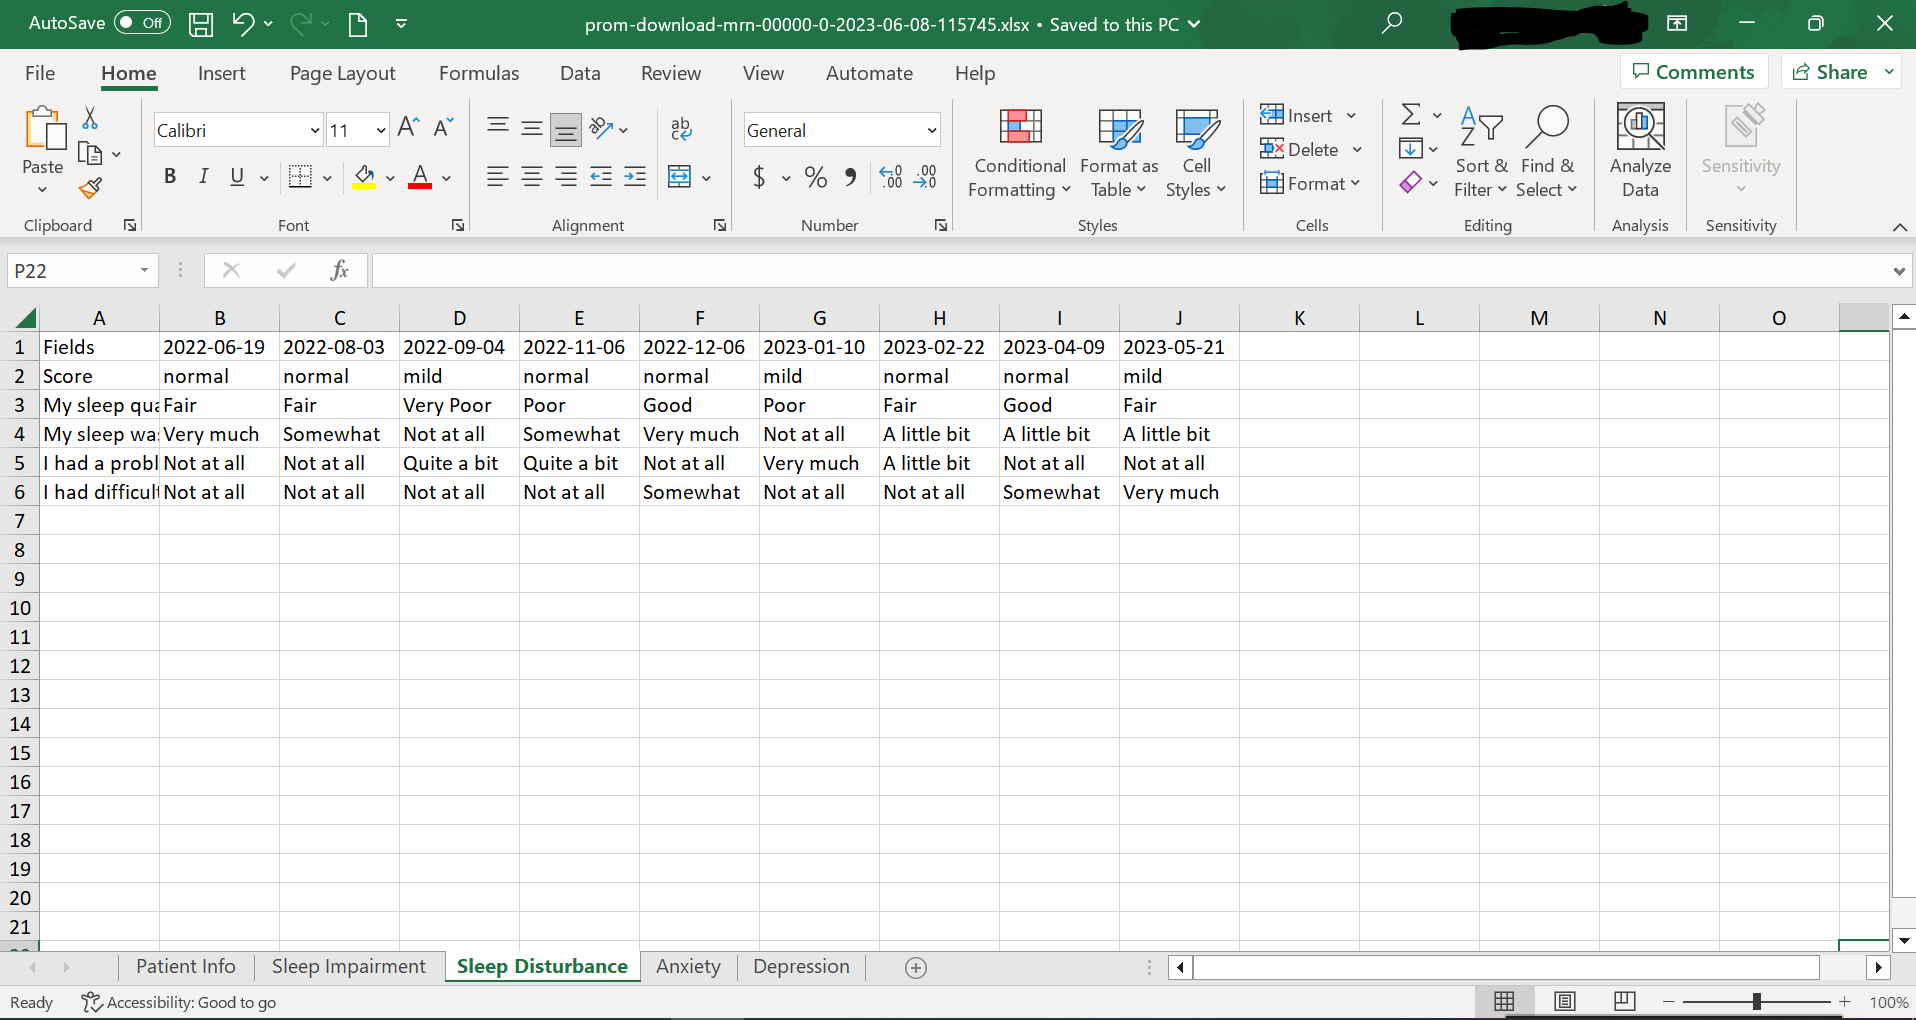 Excel file for the PROM data download displaying the PROM scores over time